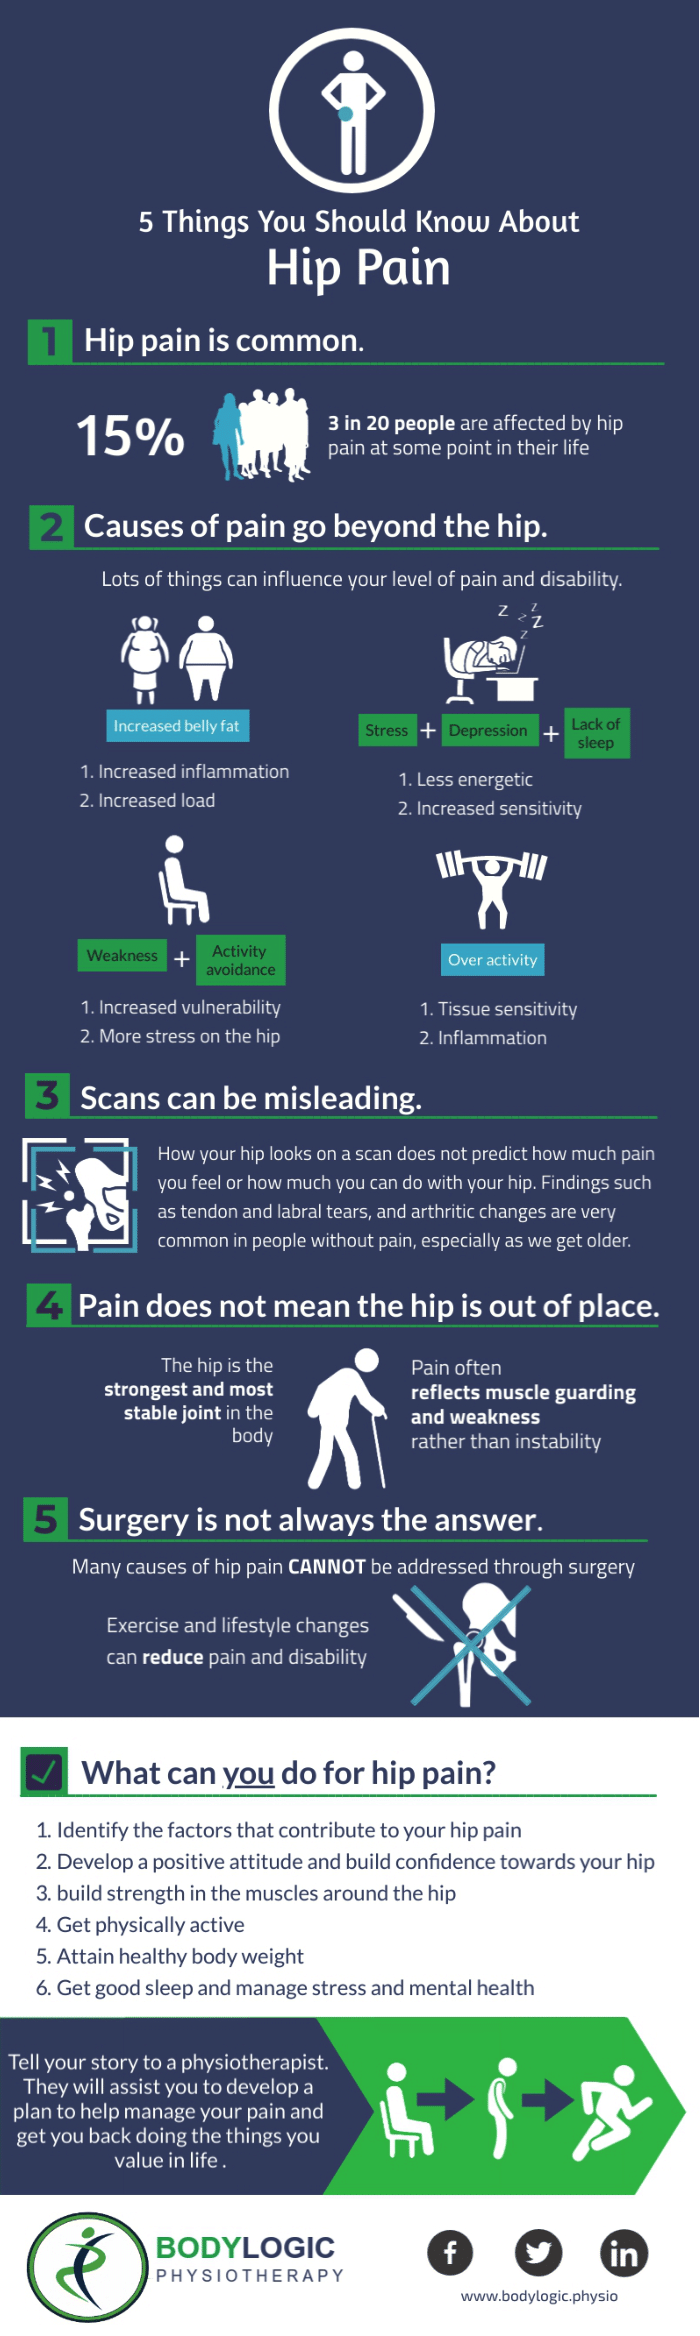 https://bodylogic.physio/wp-content/uploads/2022/08/hip-pain-1.png